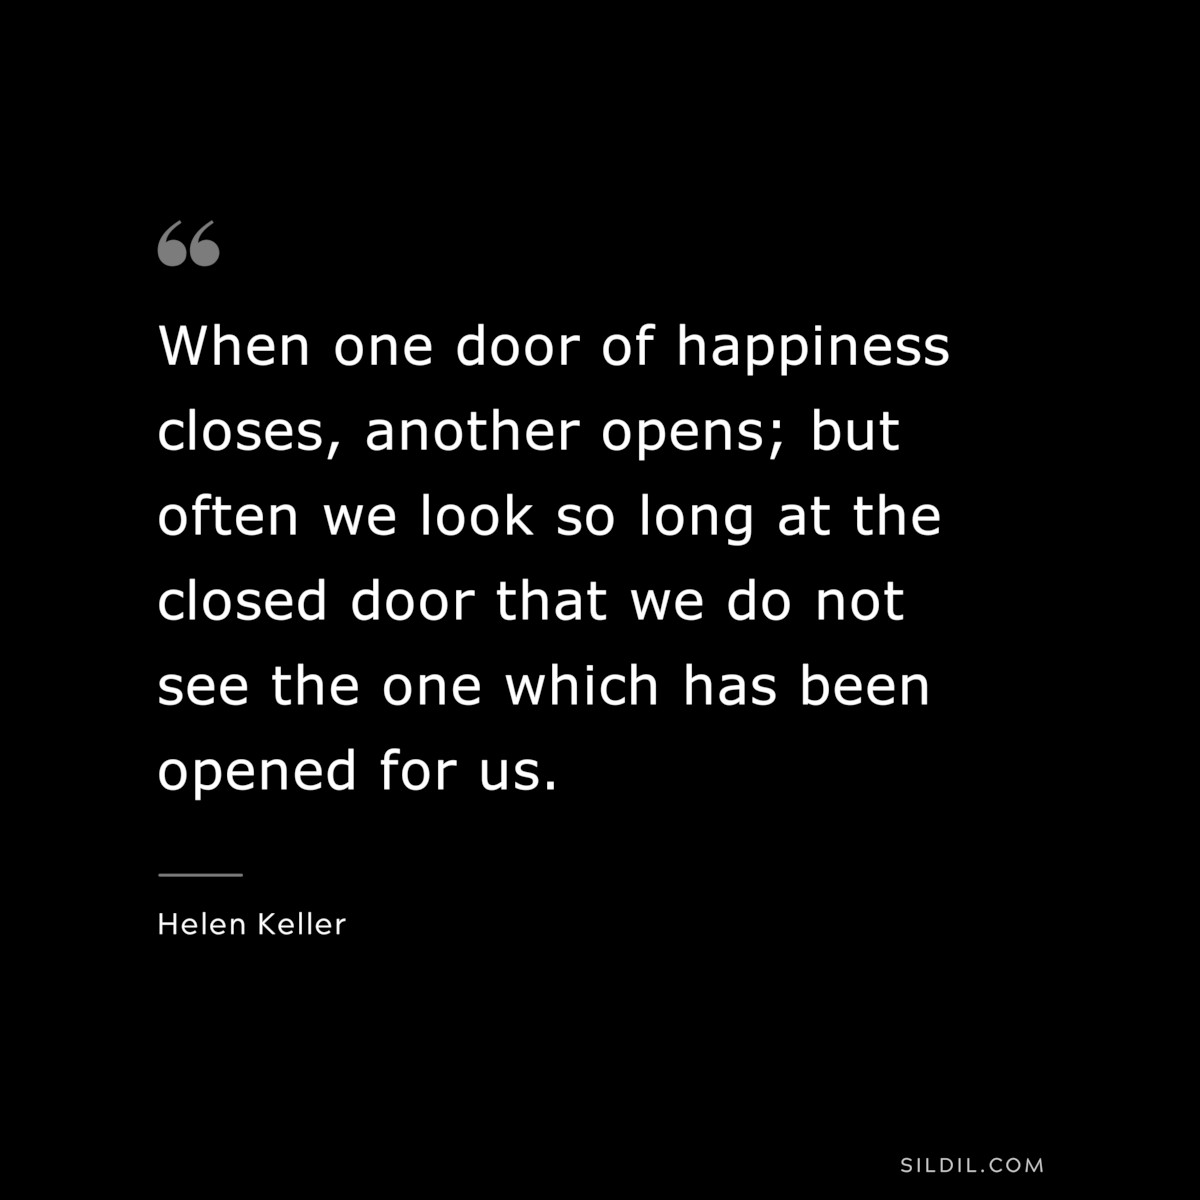 When one door of happiness closes, another opens; but often we look so long at the closed door that we do not see the one which has been opened for us. ― Helen Keller